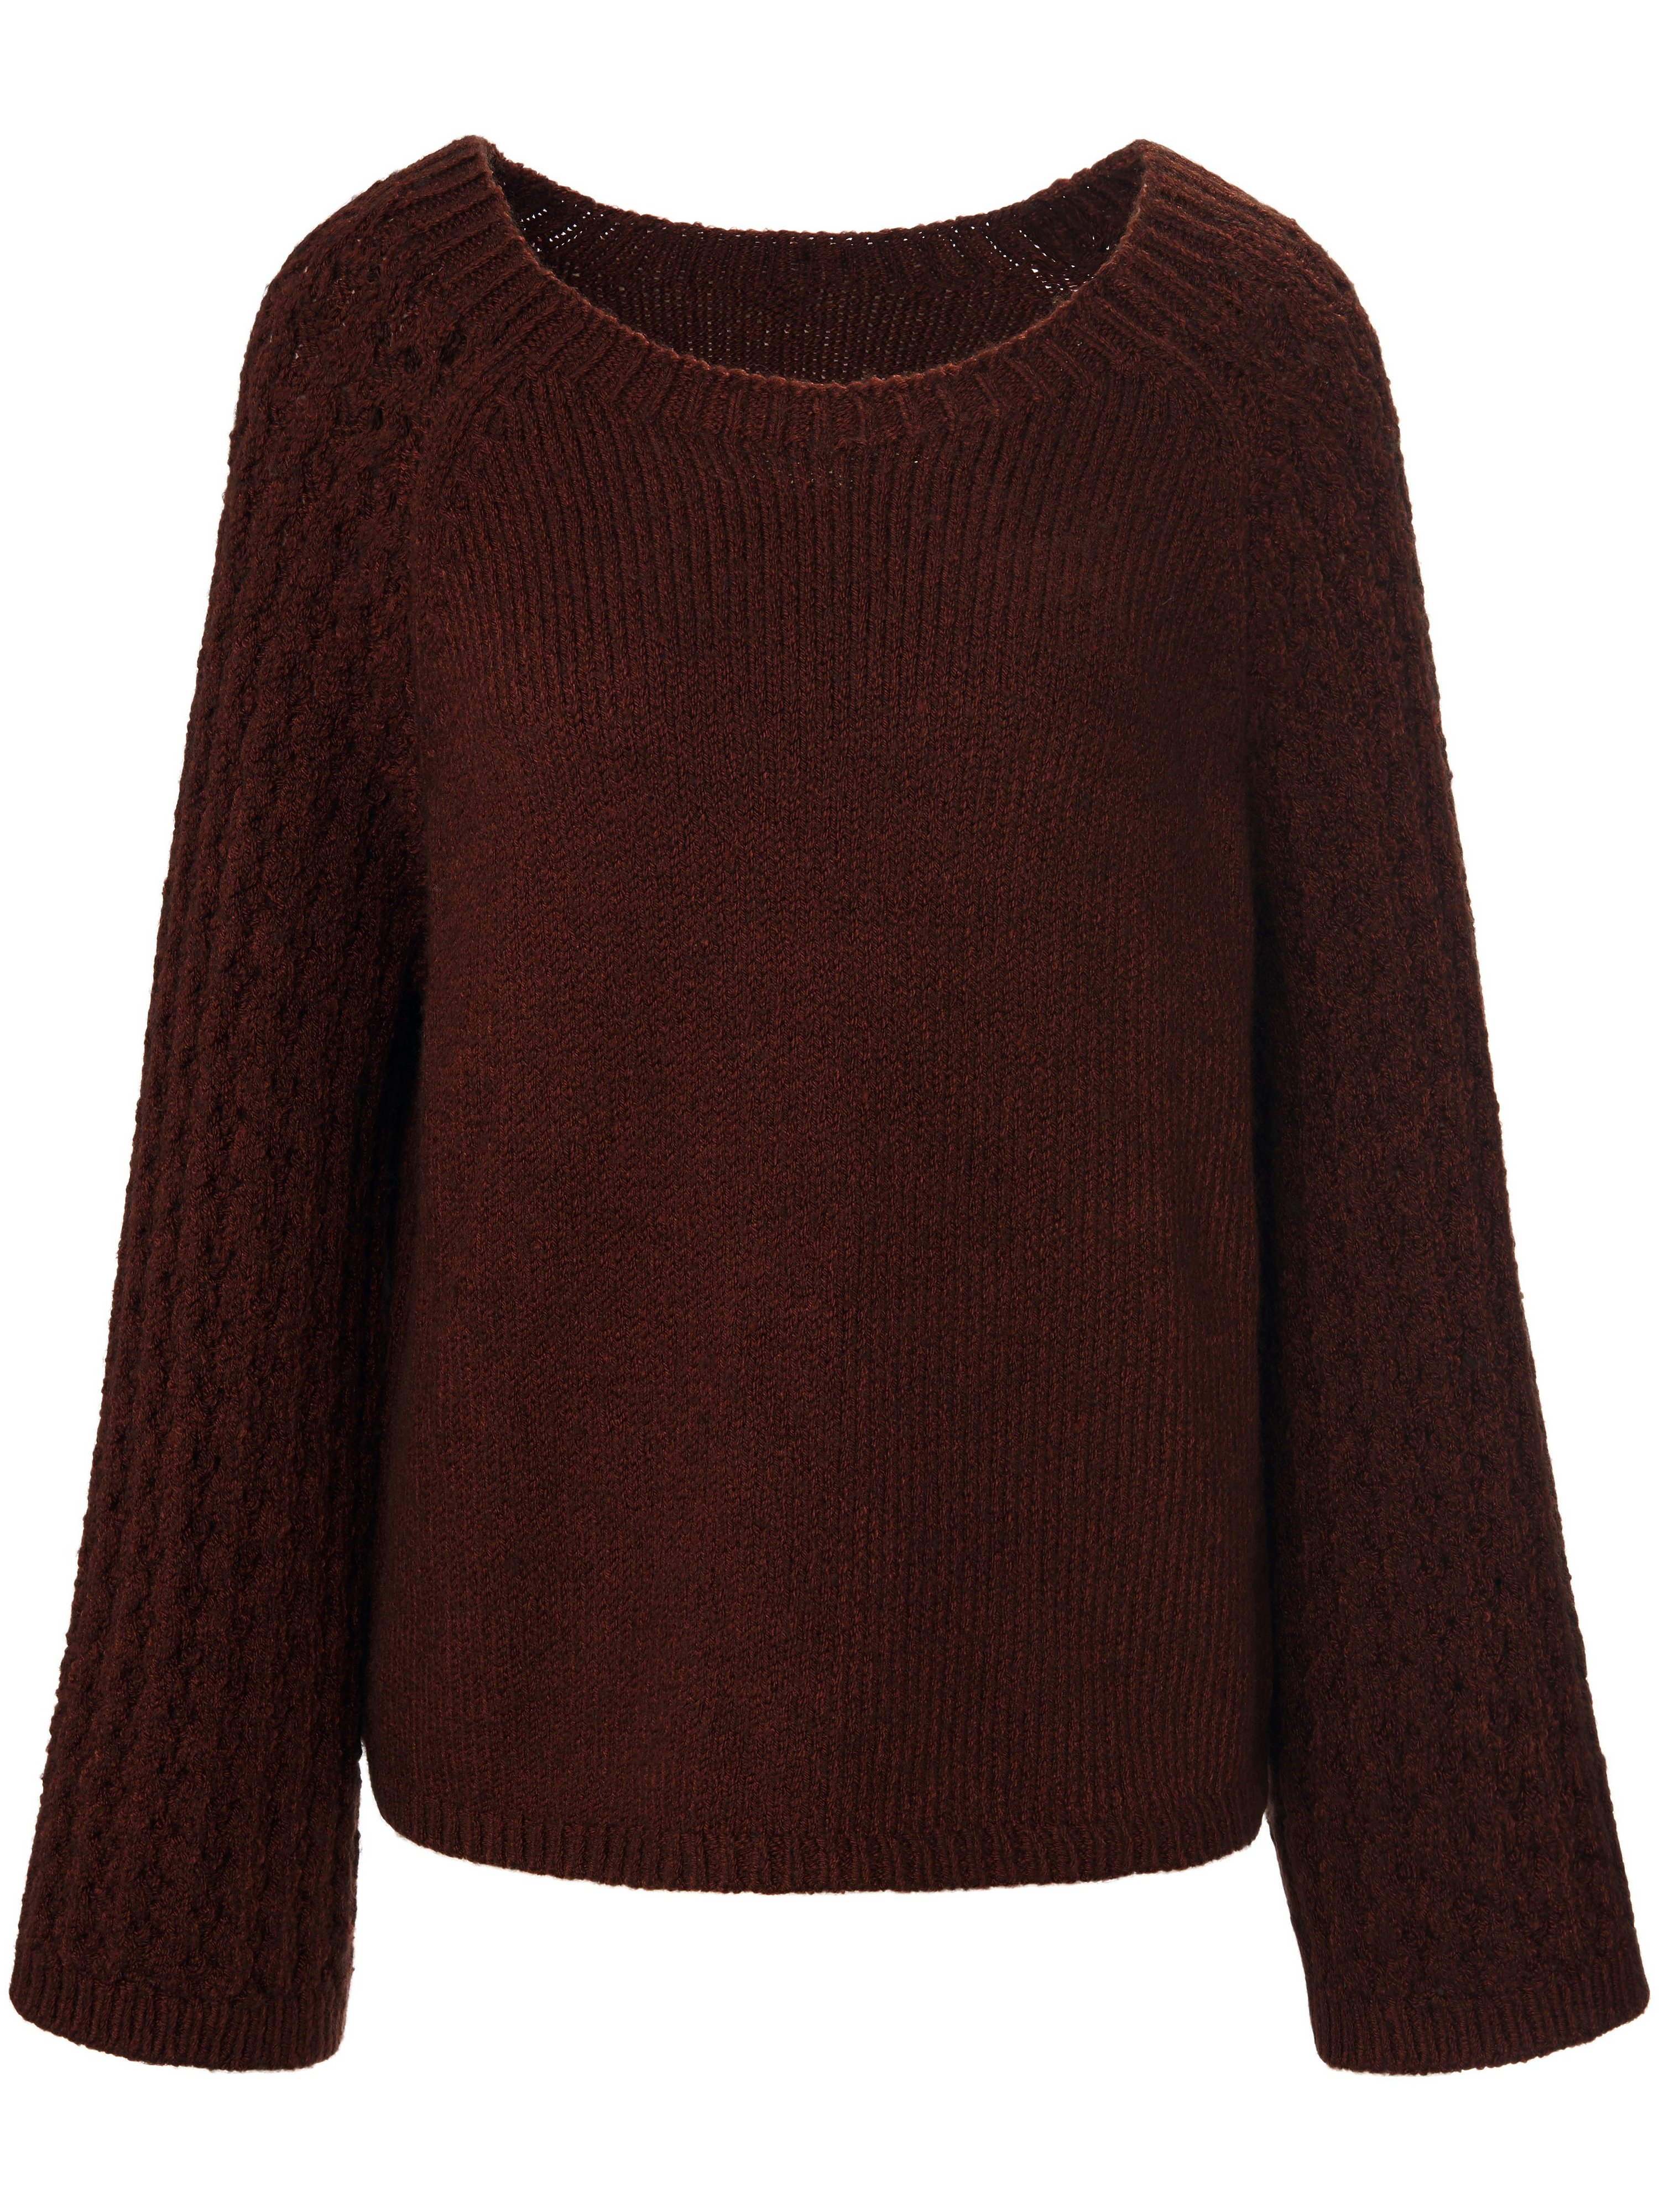 Le pull manches longues raglan  tRUE STANDARD marron taille 40